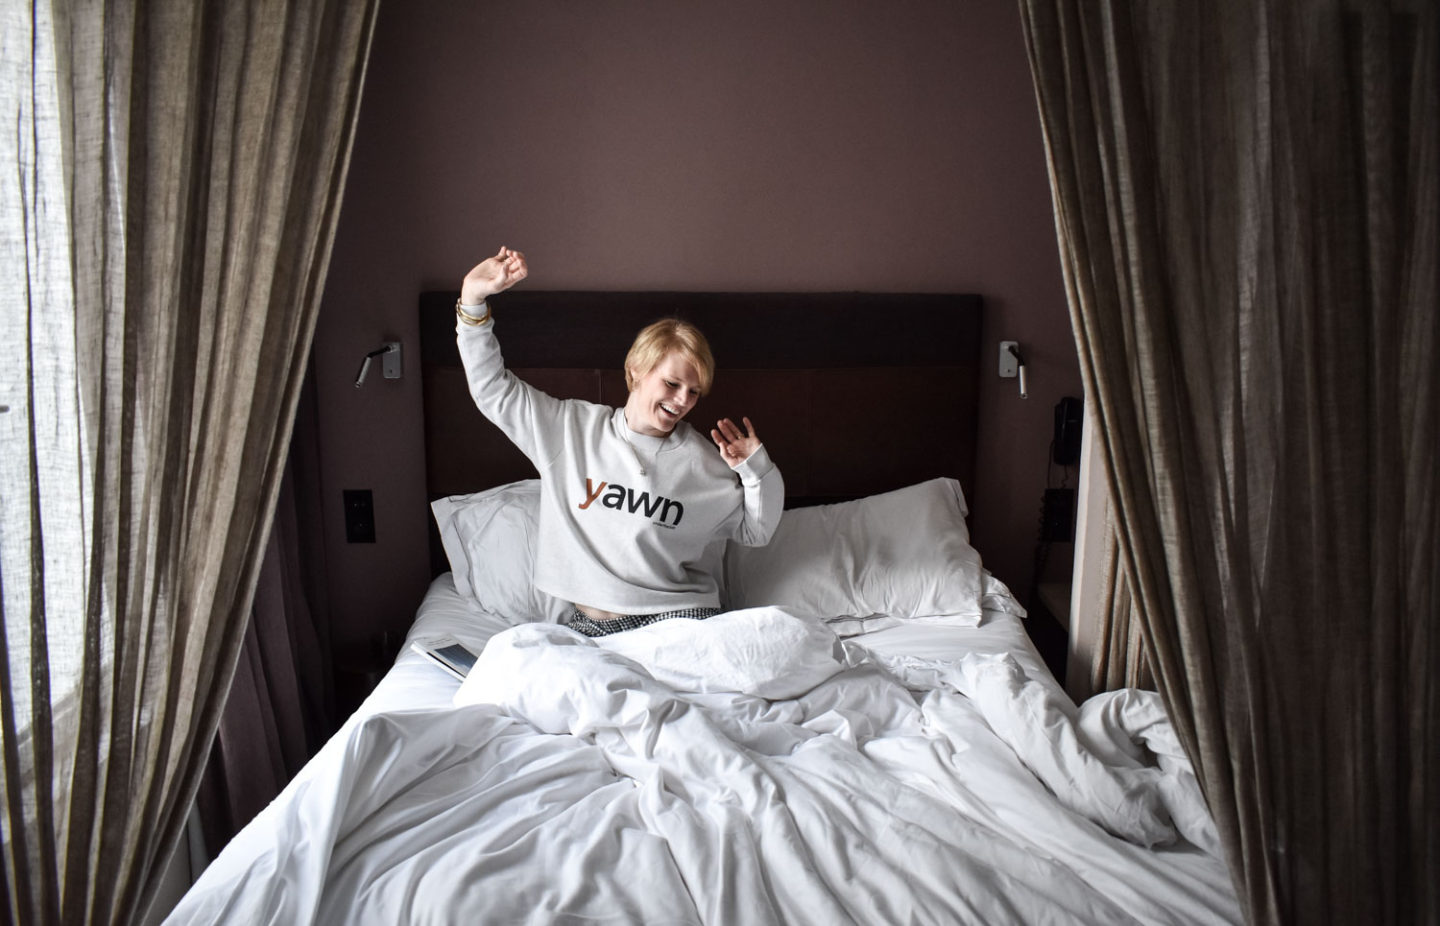 Morning stretch from Karen Maurice sustainable style blogger of n4mummy, wearing Yawn sweatshirt from ethical brand Under The Cloth